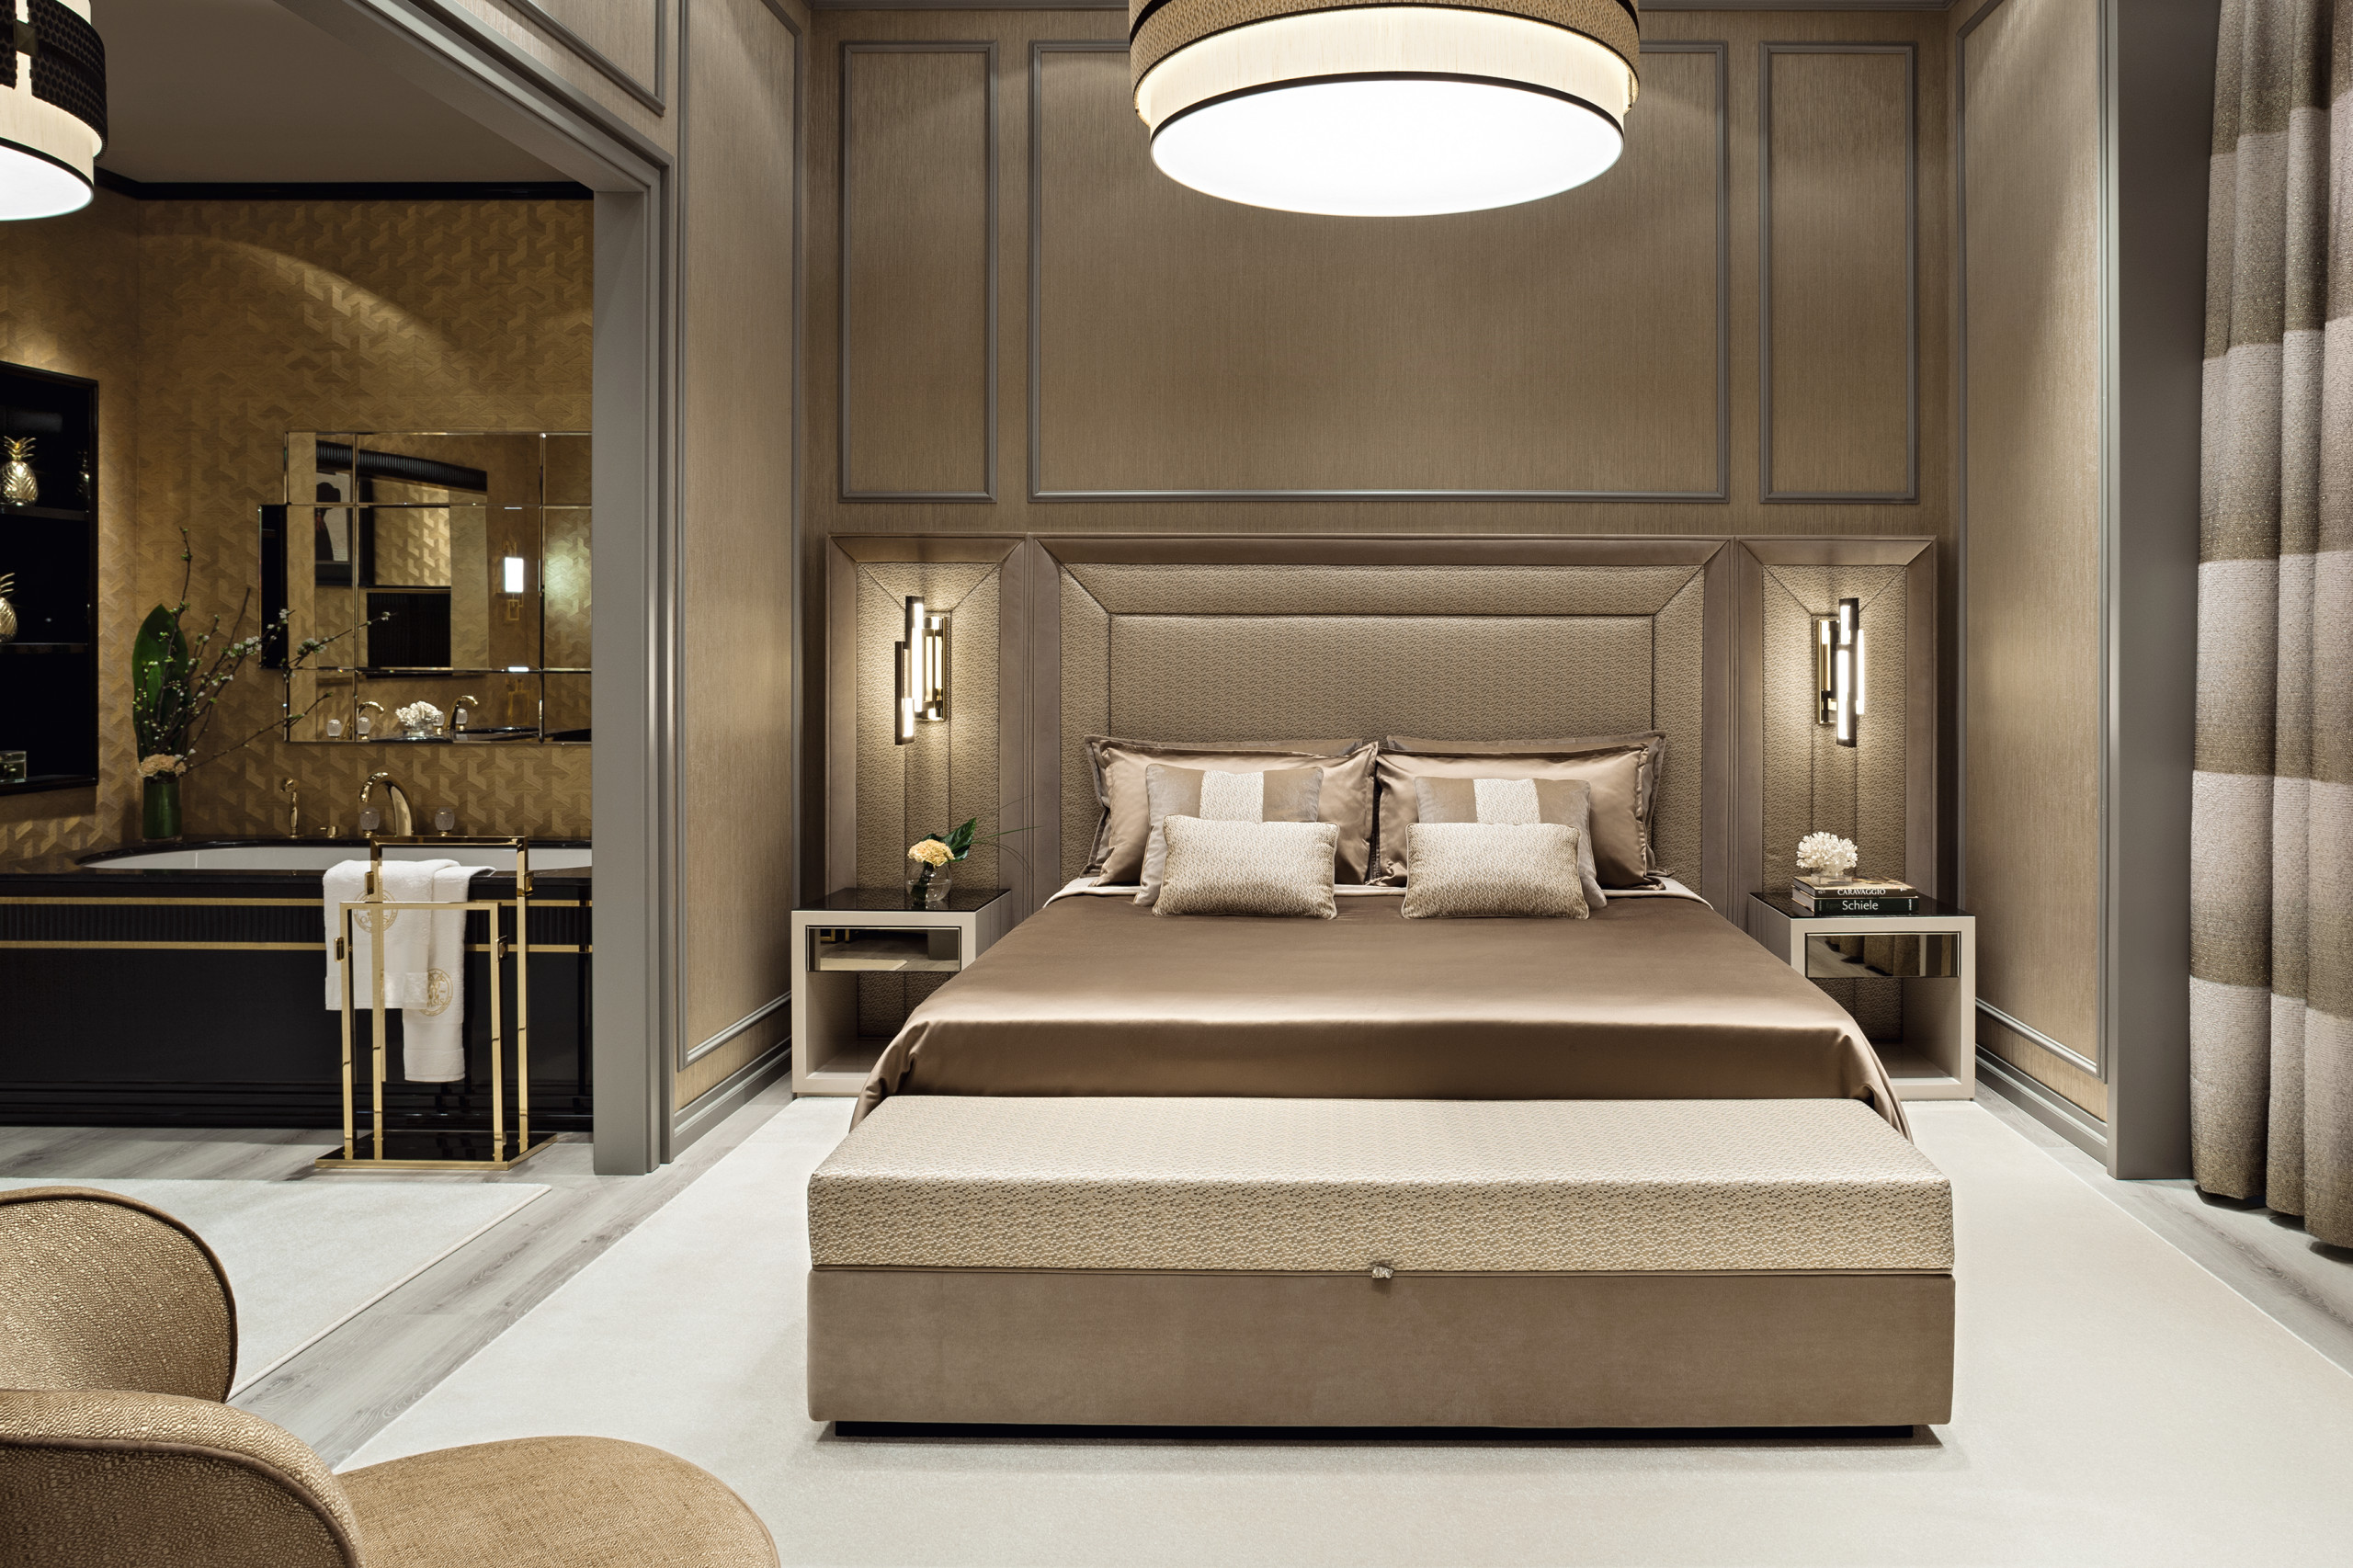 Boutique Hotel Style - Contemporary - Bedroom - London - by Juliettes  Interiors Ltd | Houzz